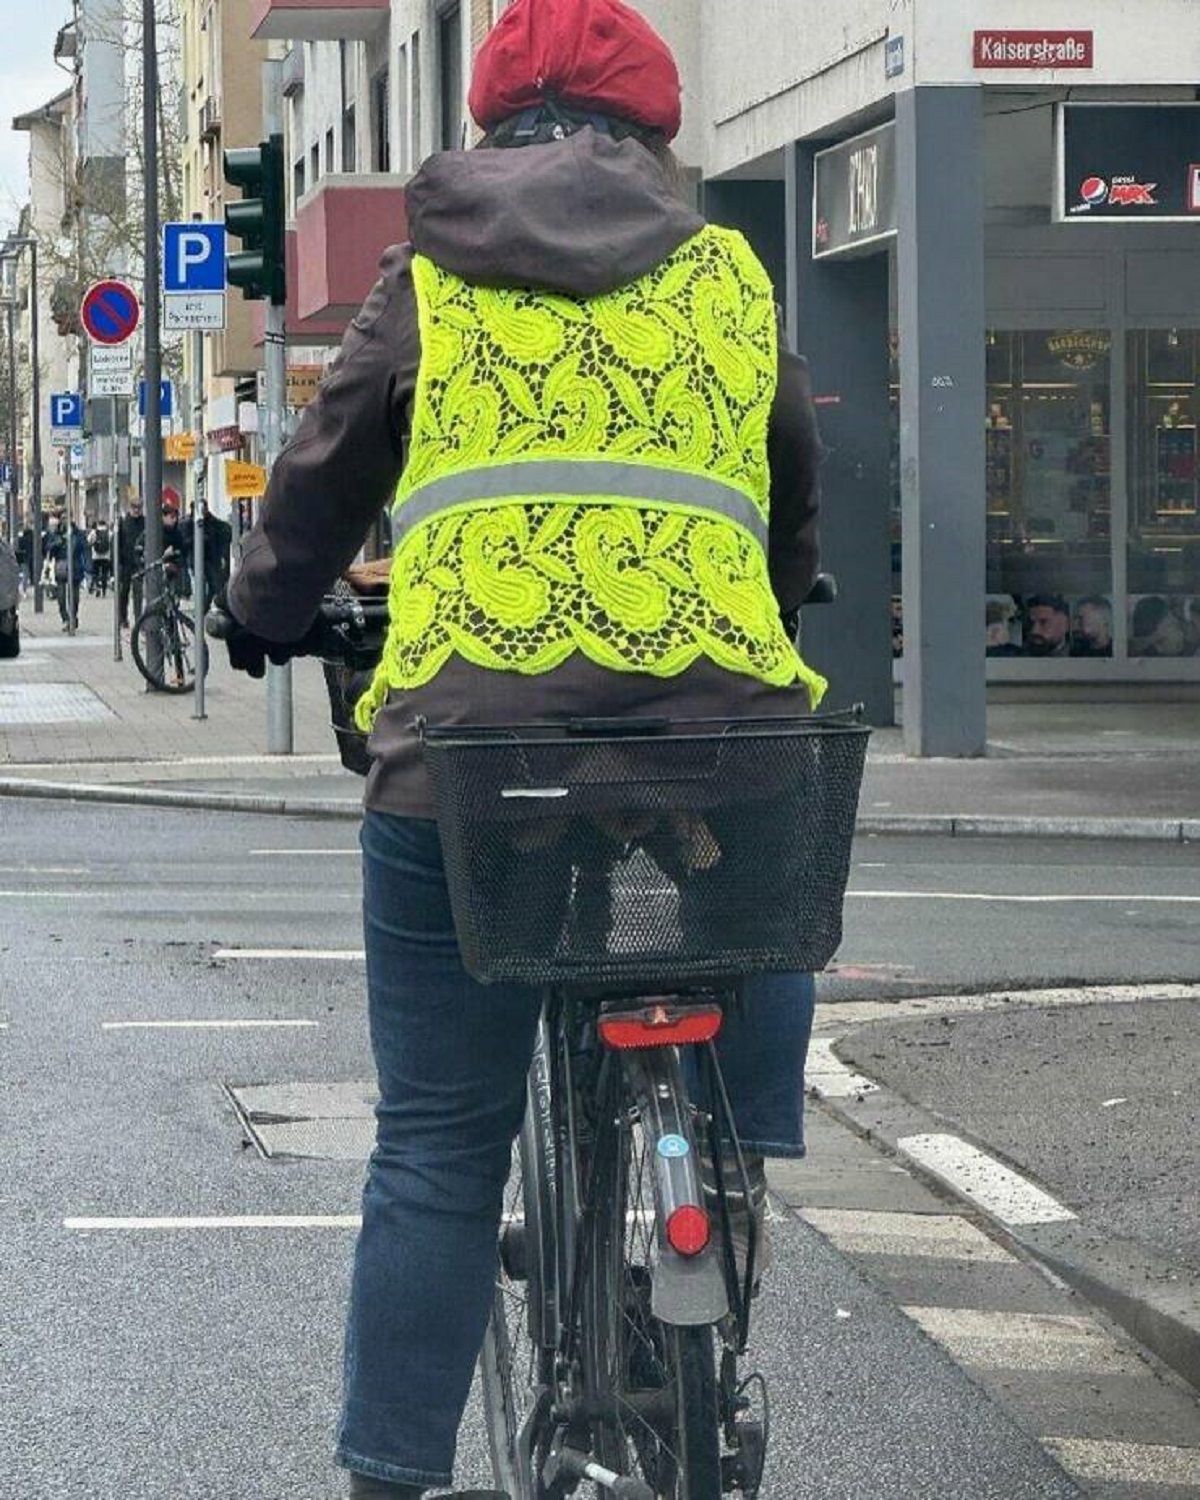 "This Person Is Wearing A Crochet Laced Safety Vest"